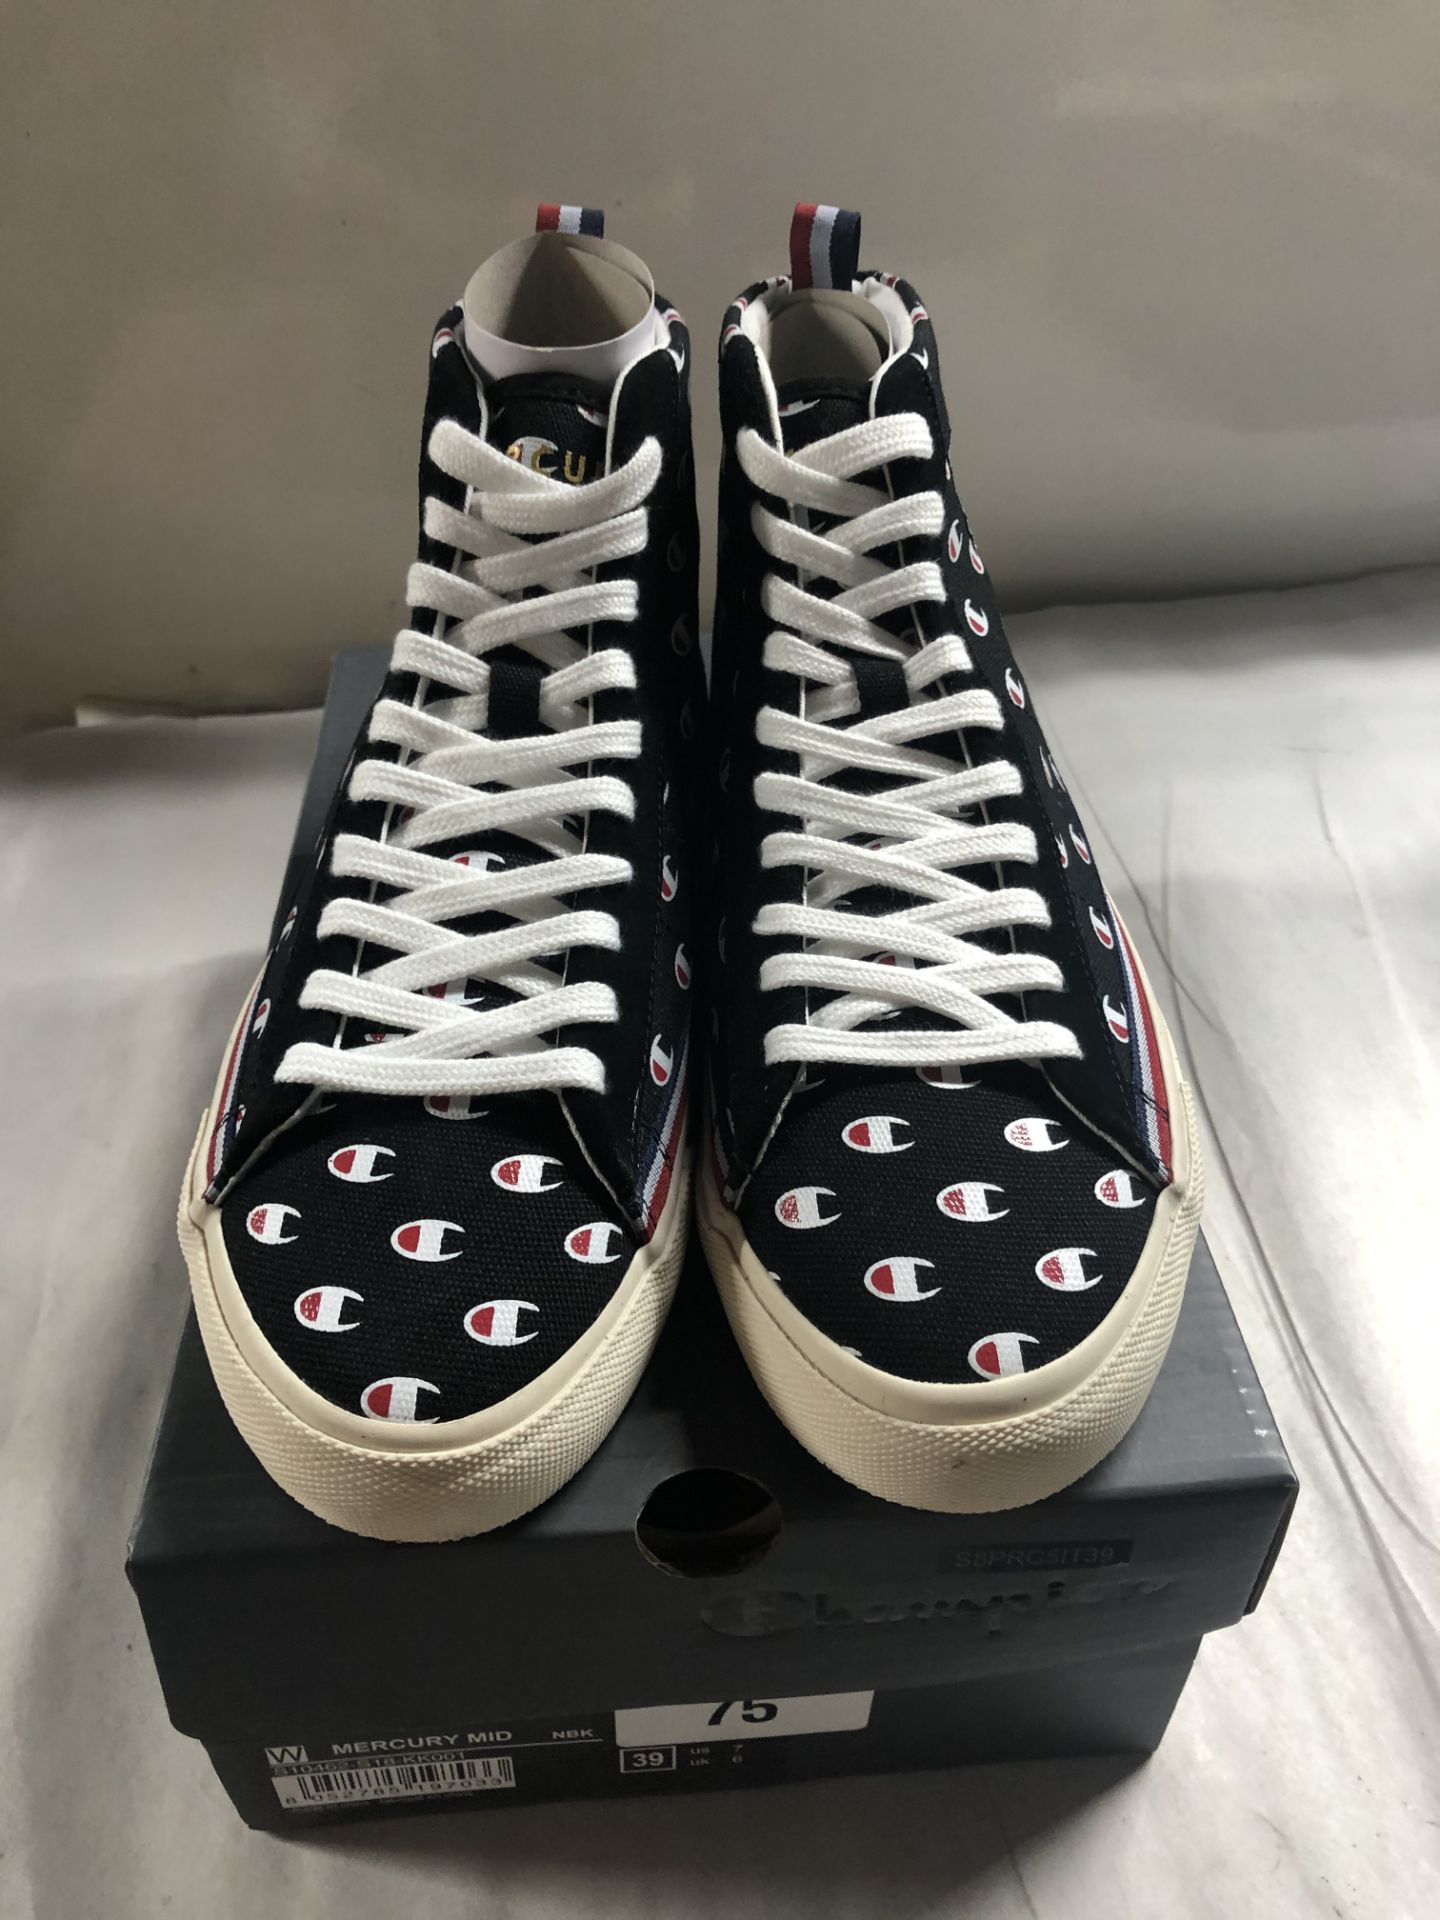 Champion High Top Sneakers. UK 6 - Image 2 of 4